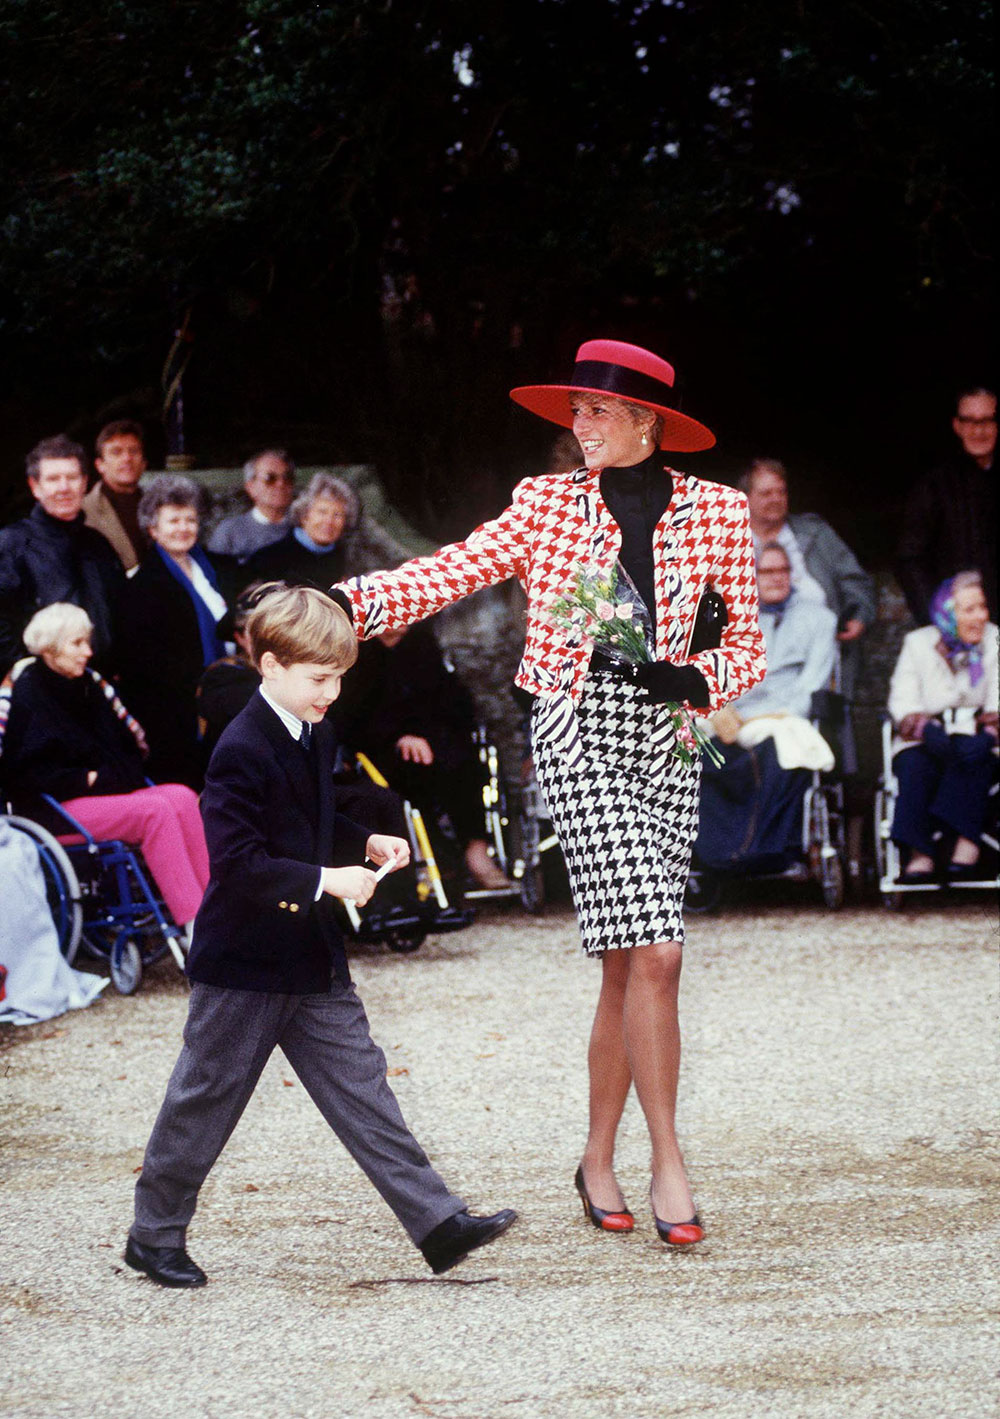 23 December, 1990 - Princess Diana and Prince William in Sandringham after the christening of her niece.